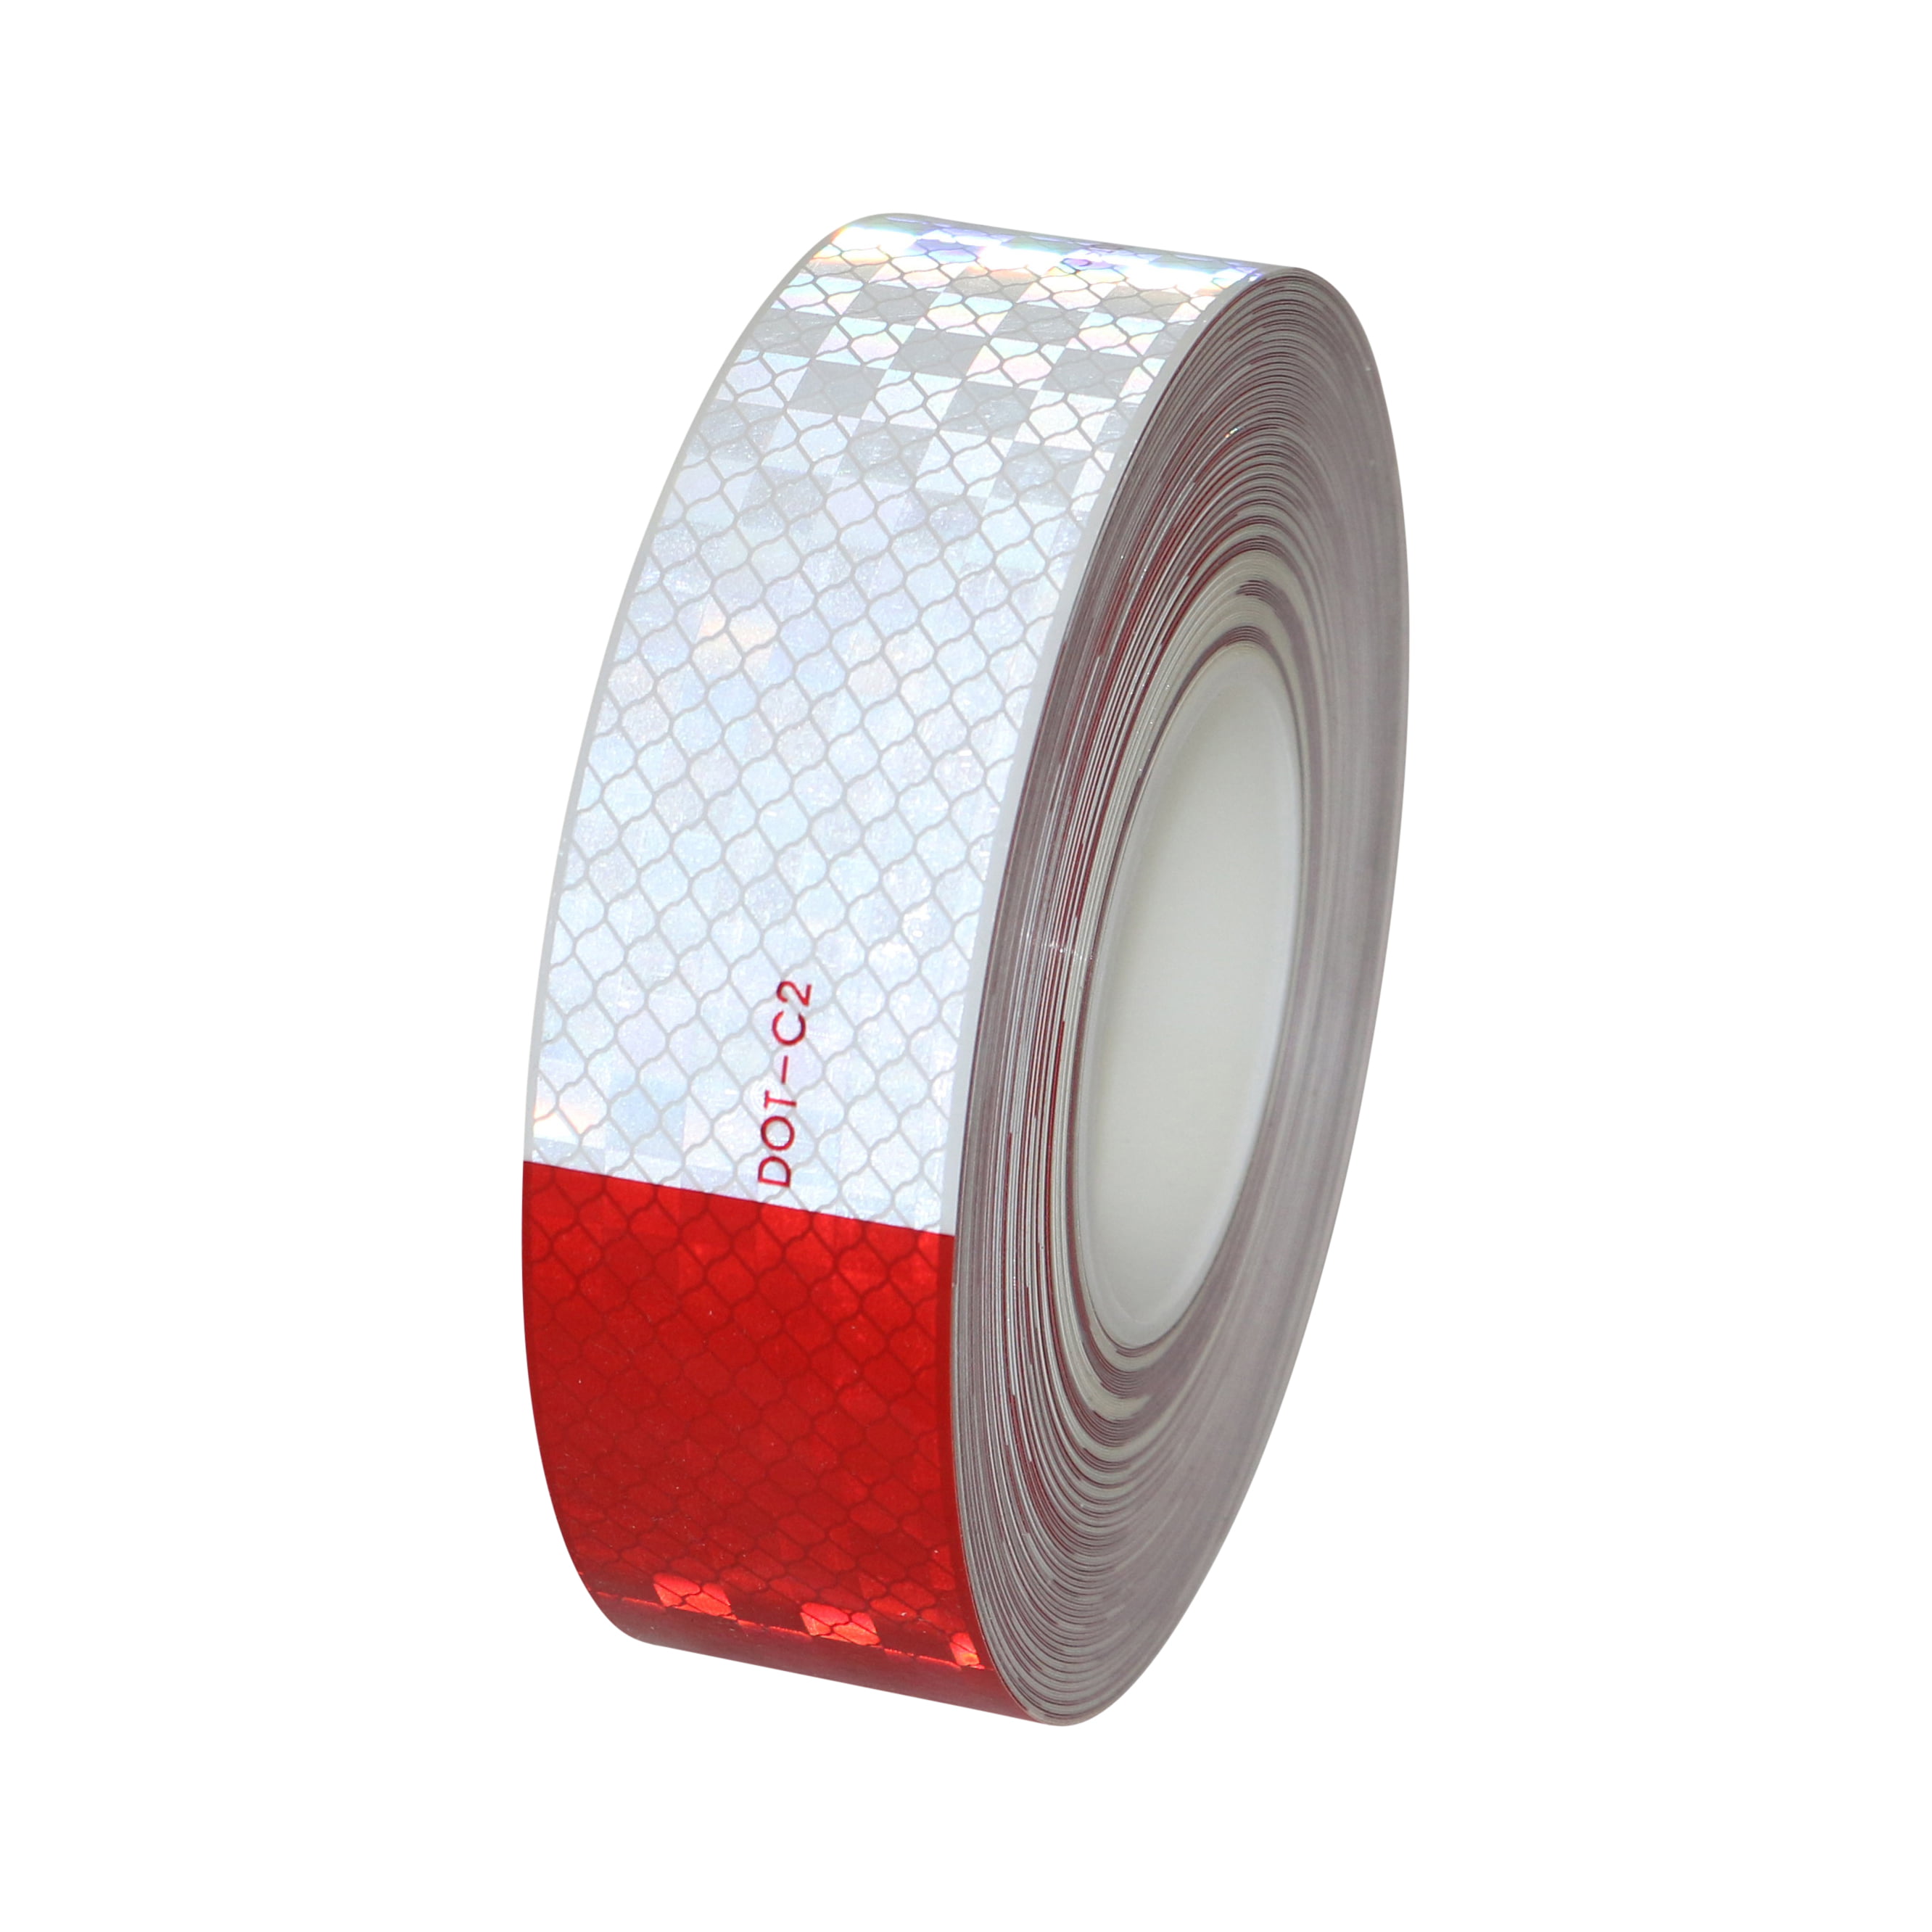 BRIGHT RED  Reflective   Conspicuity  Tape 1" x 50' 